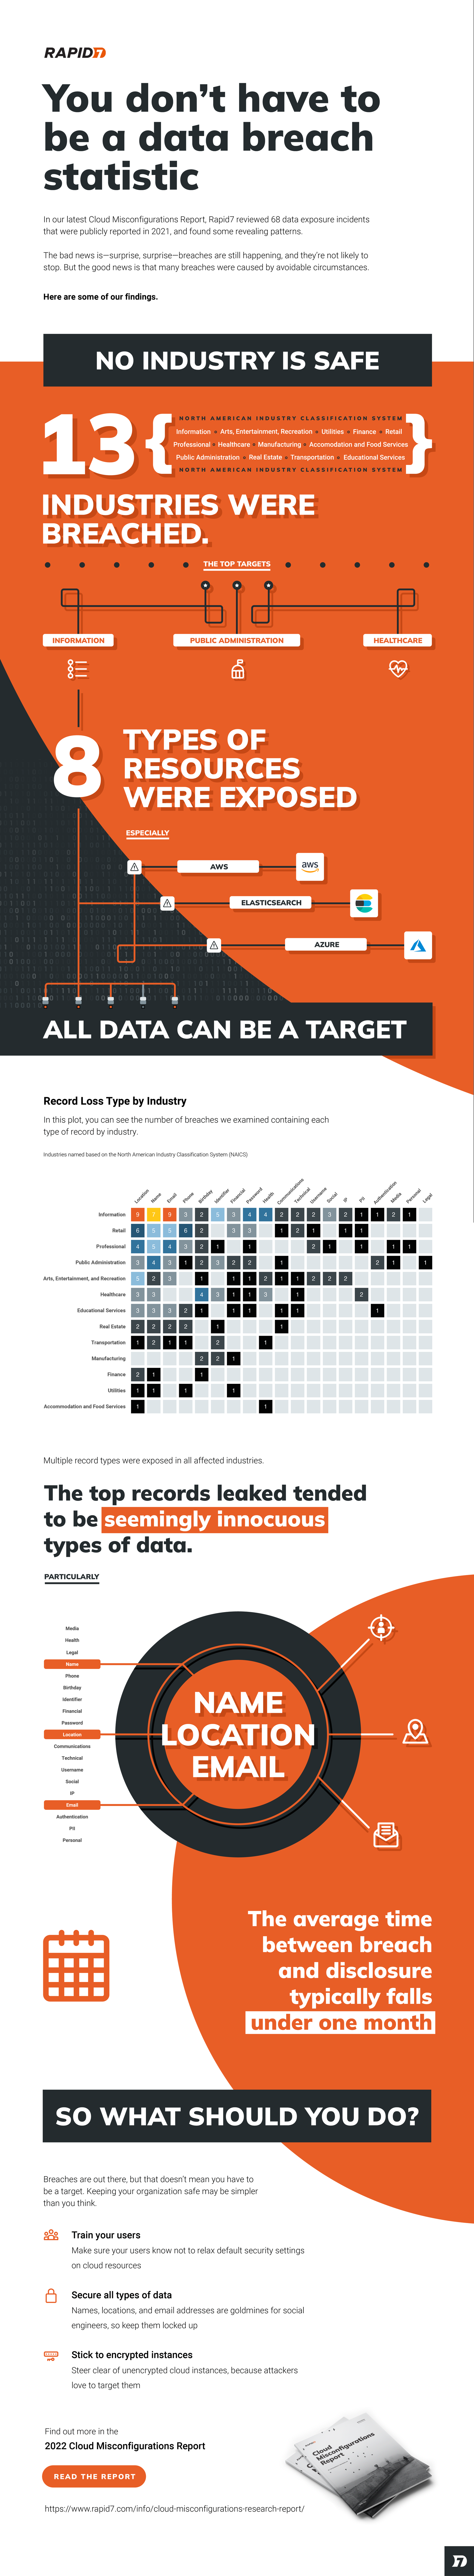 [Infographic] Cloud Misconfigurations: Don't Become a Breach Statistic